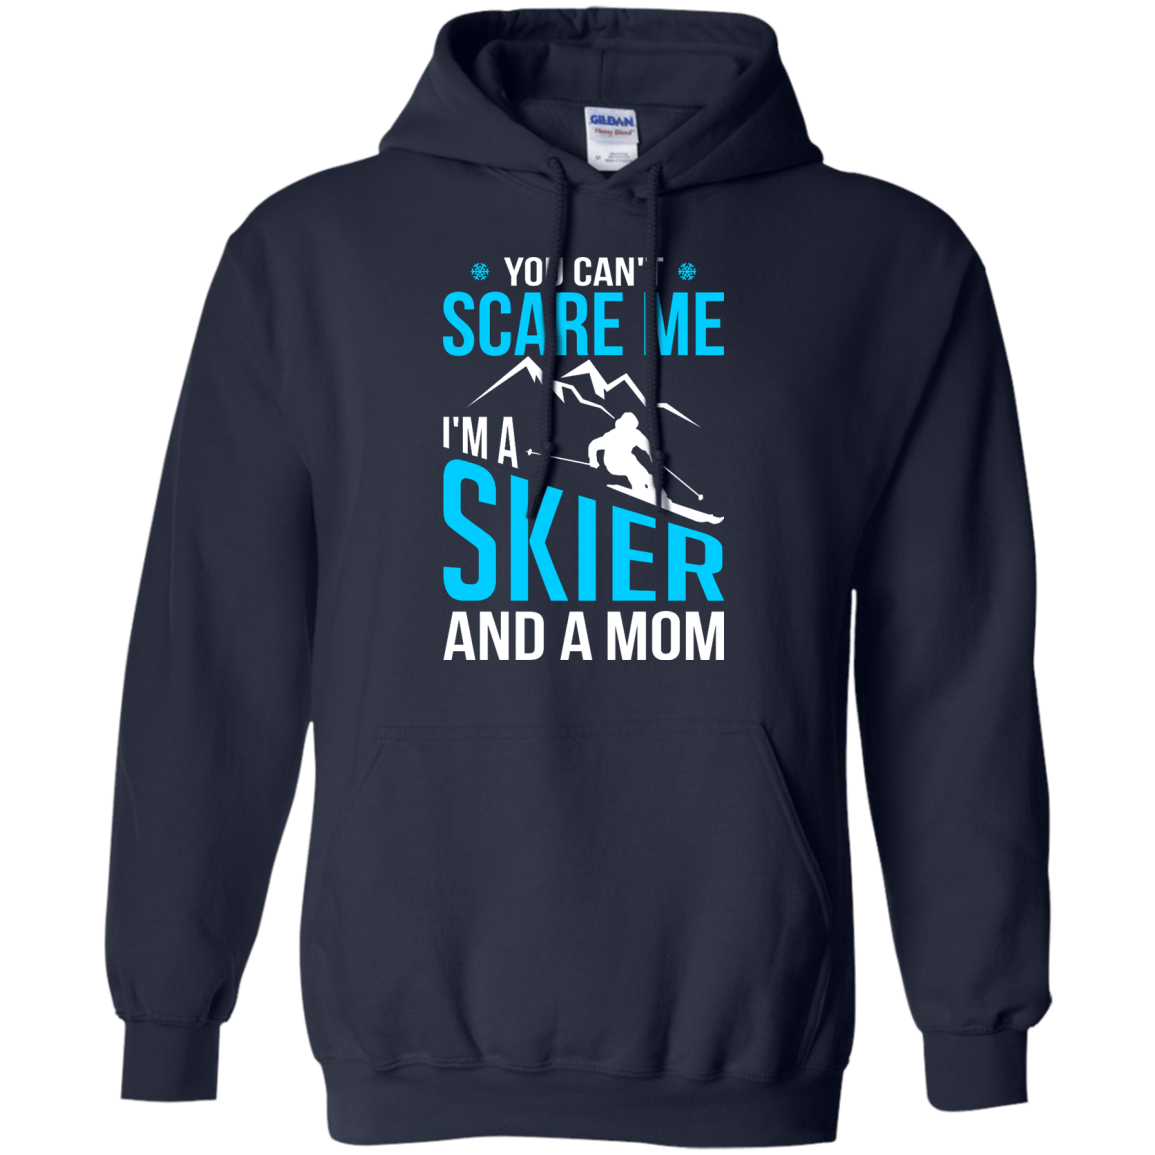 You Can't Scare Me, I'm A Skier And A Mom Hoodies - Powderaddicts